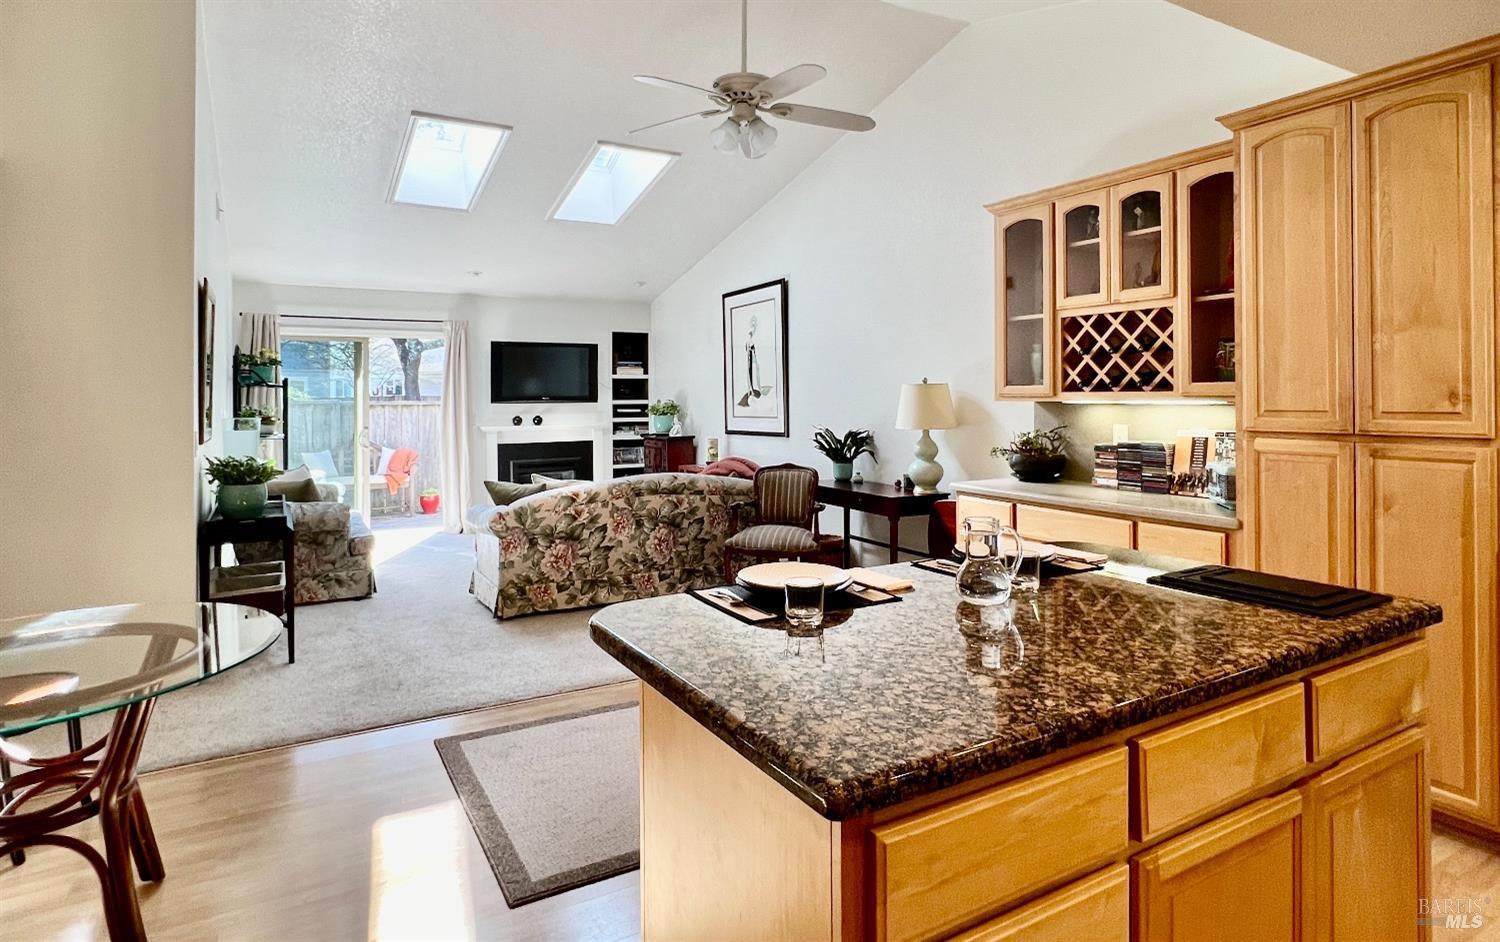 KITCHEN ¦ DINING ROOM ¦ LIVING ROOM ¦ LR WITH 2 SKYLIGHTS, GAS FIREPLACE INSERT AND DECK ACCESSING OUTDOORS WITH GAS BBQ HOOK-UP ¦ DECK OVERLOOKING HOA MAINTAINED GREEN SPACE ¦ INDOOR OUTDOOR LIVING